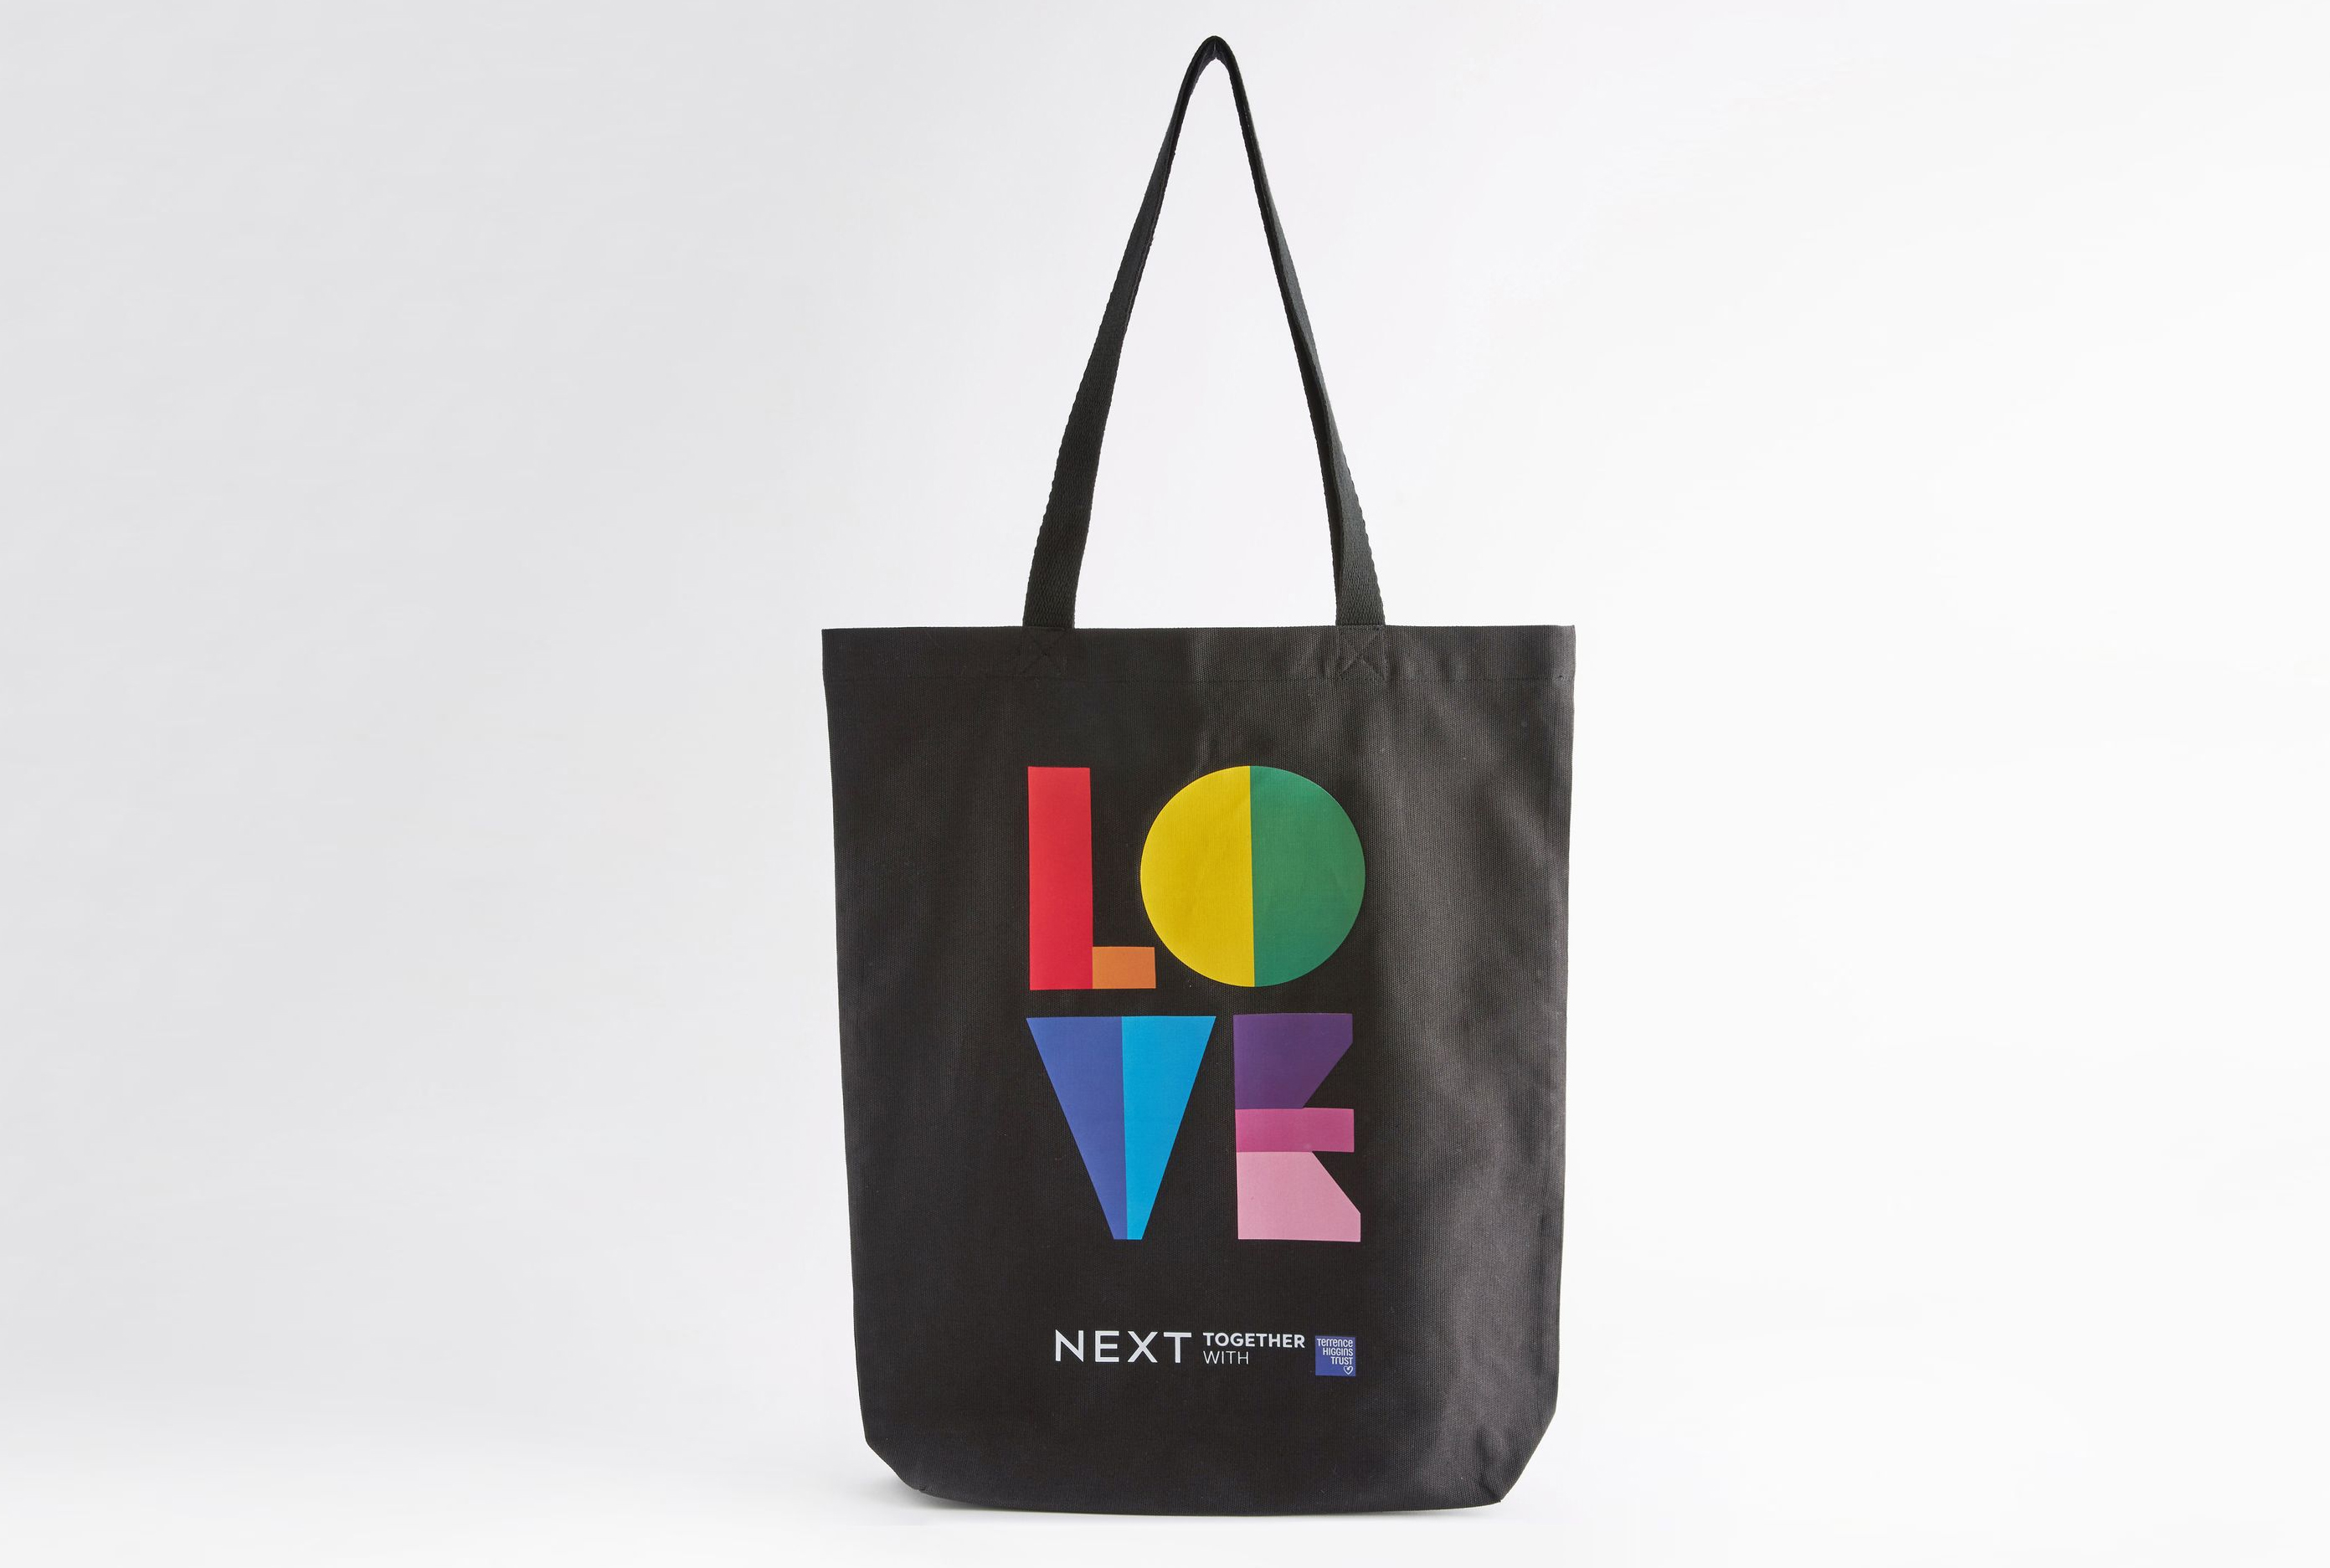 Tote bag with love written on it in pride flag colours